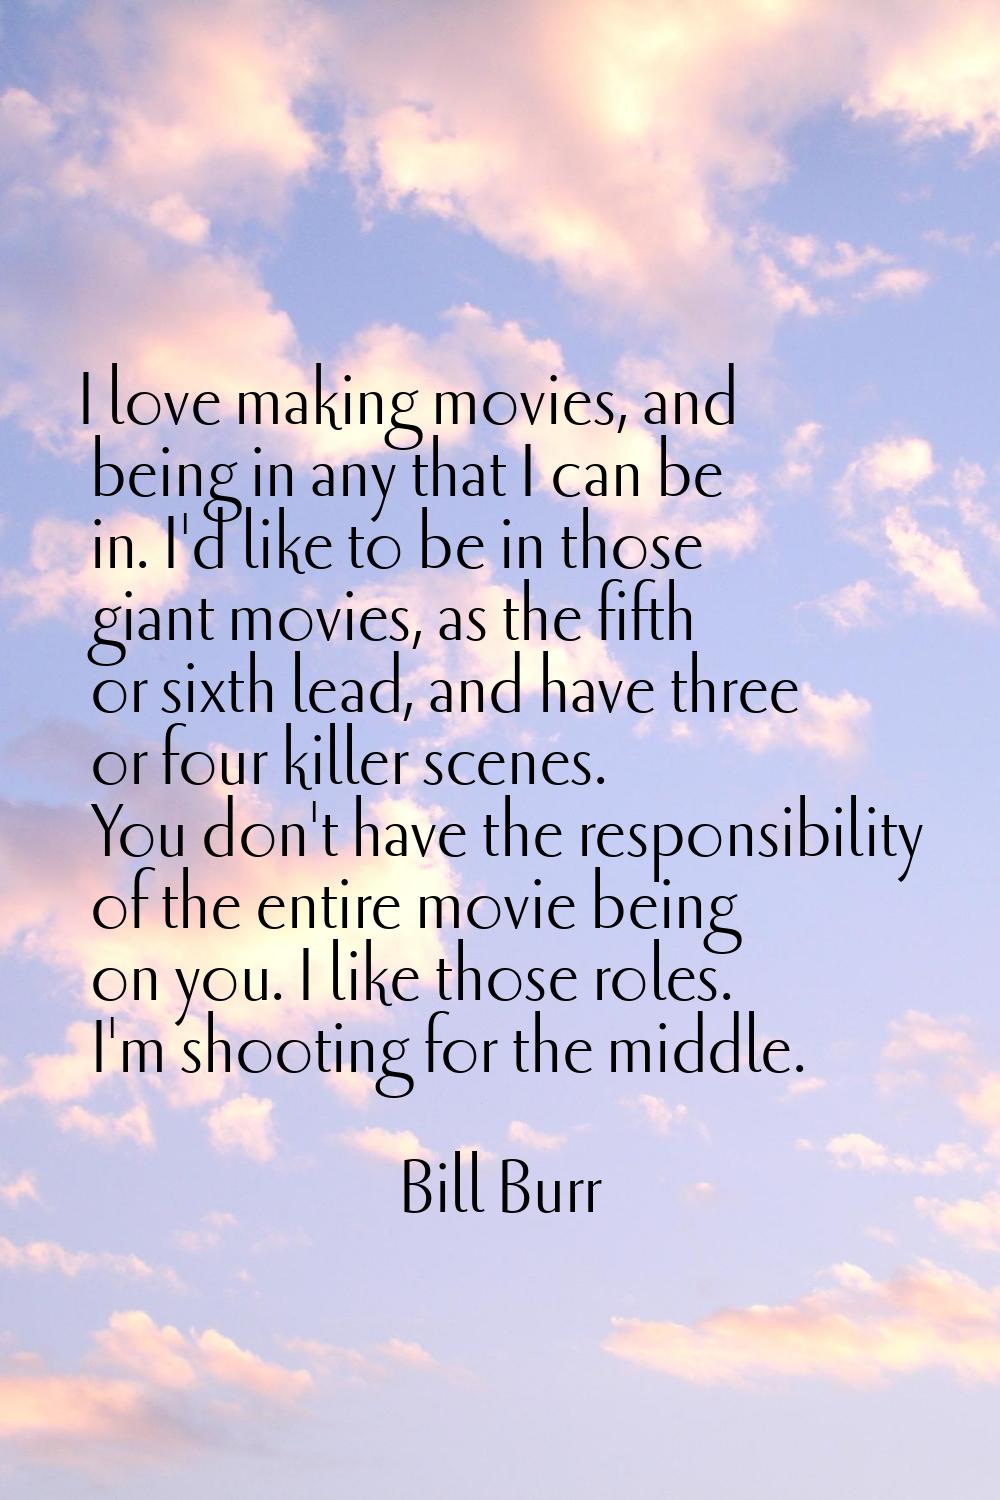 I love making movies, and being in any that I can be in. I'd like to be in those giant movies, as t